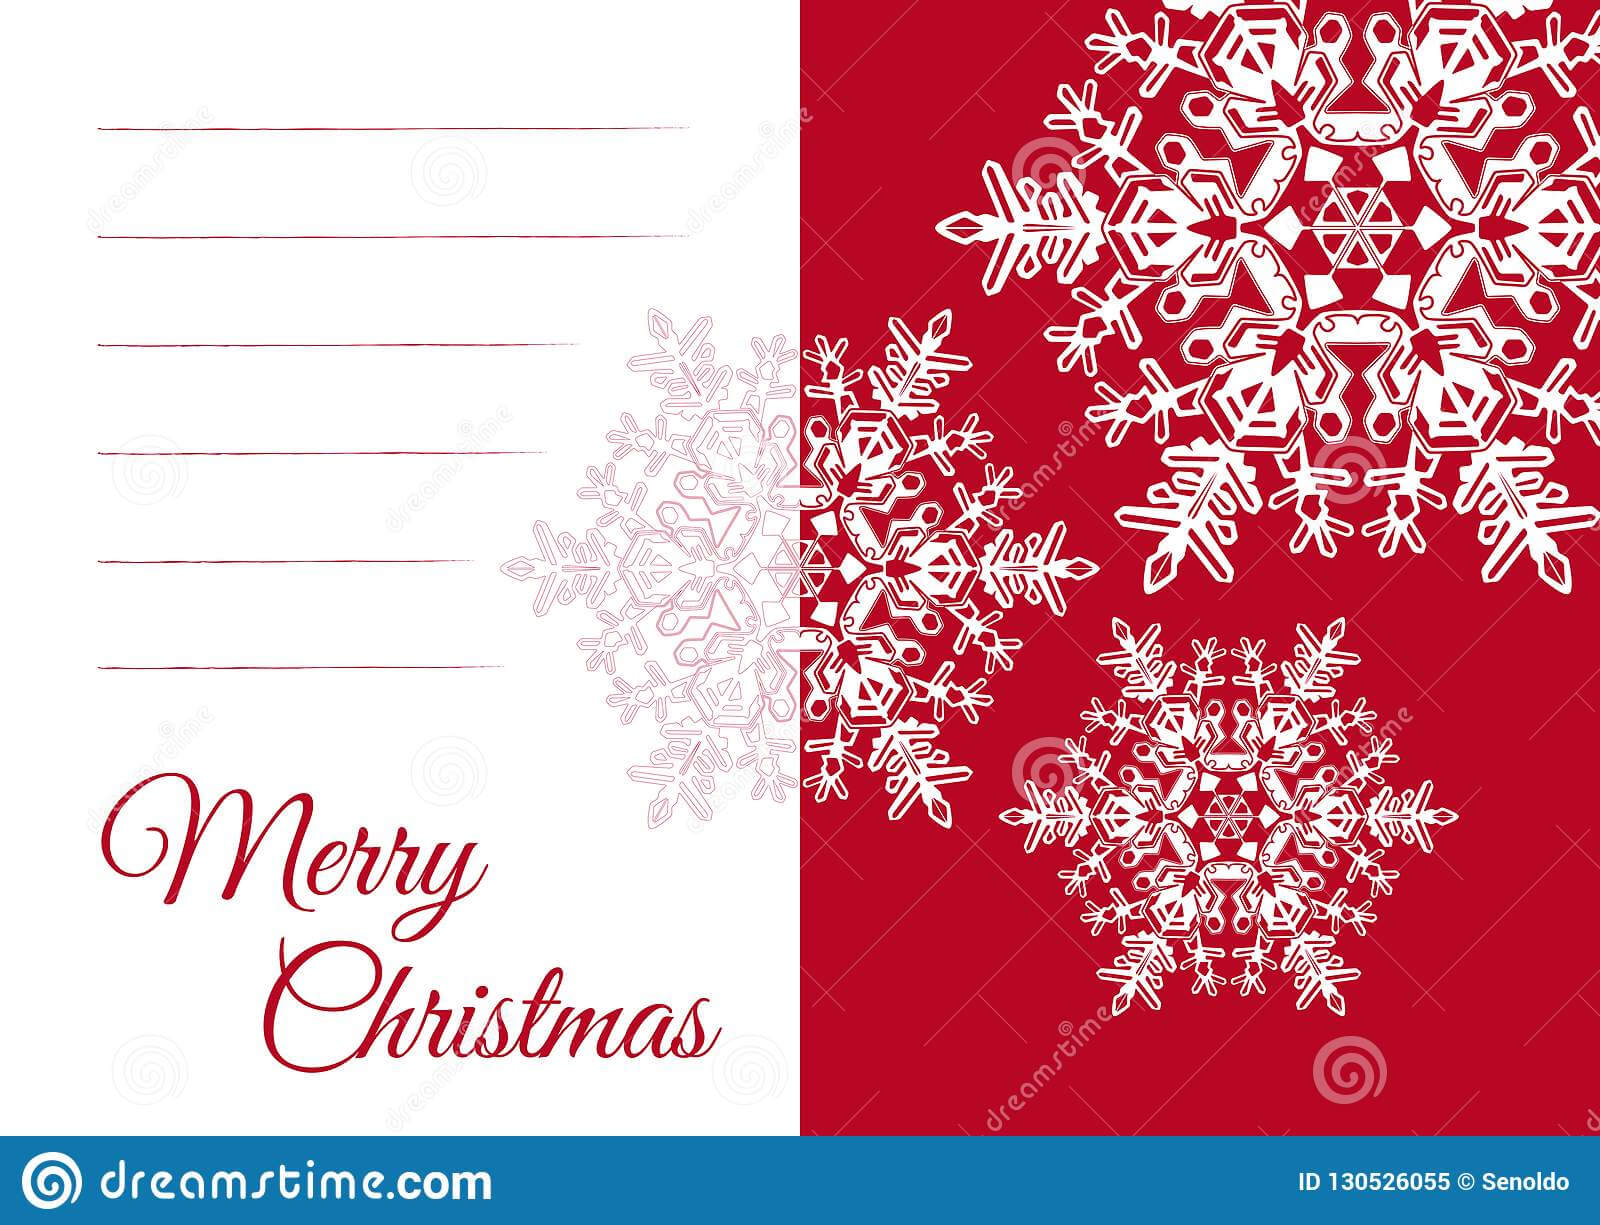 Christmas Greeting Card Template With Blank Text Field Stock Throughout Blank Snowflake Template